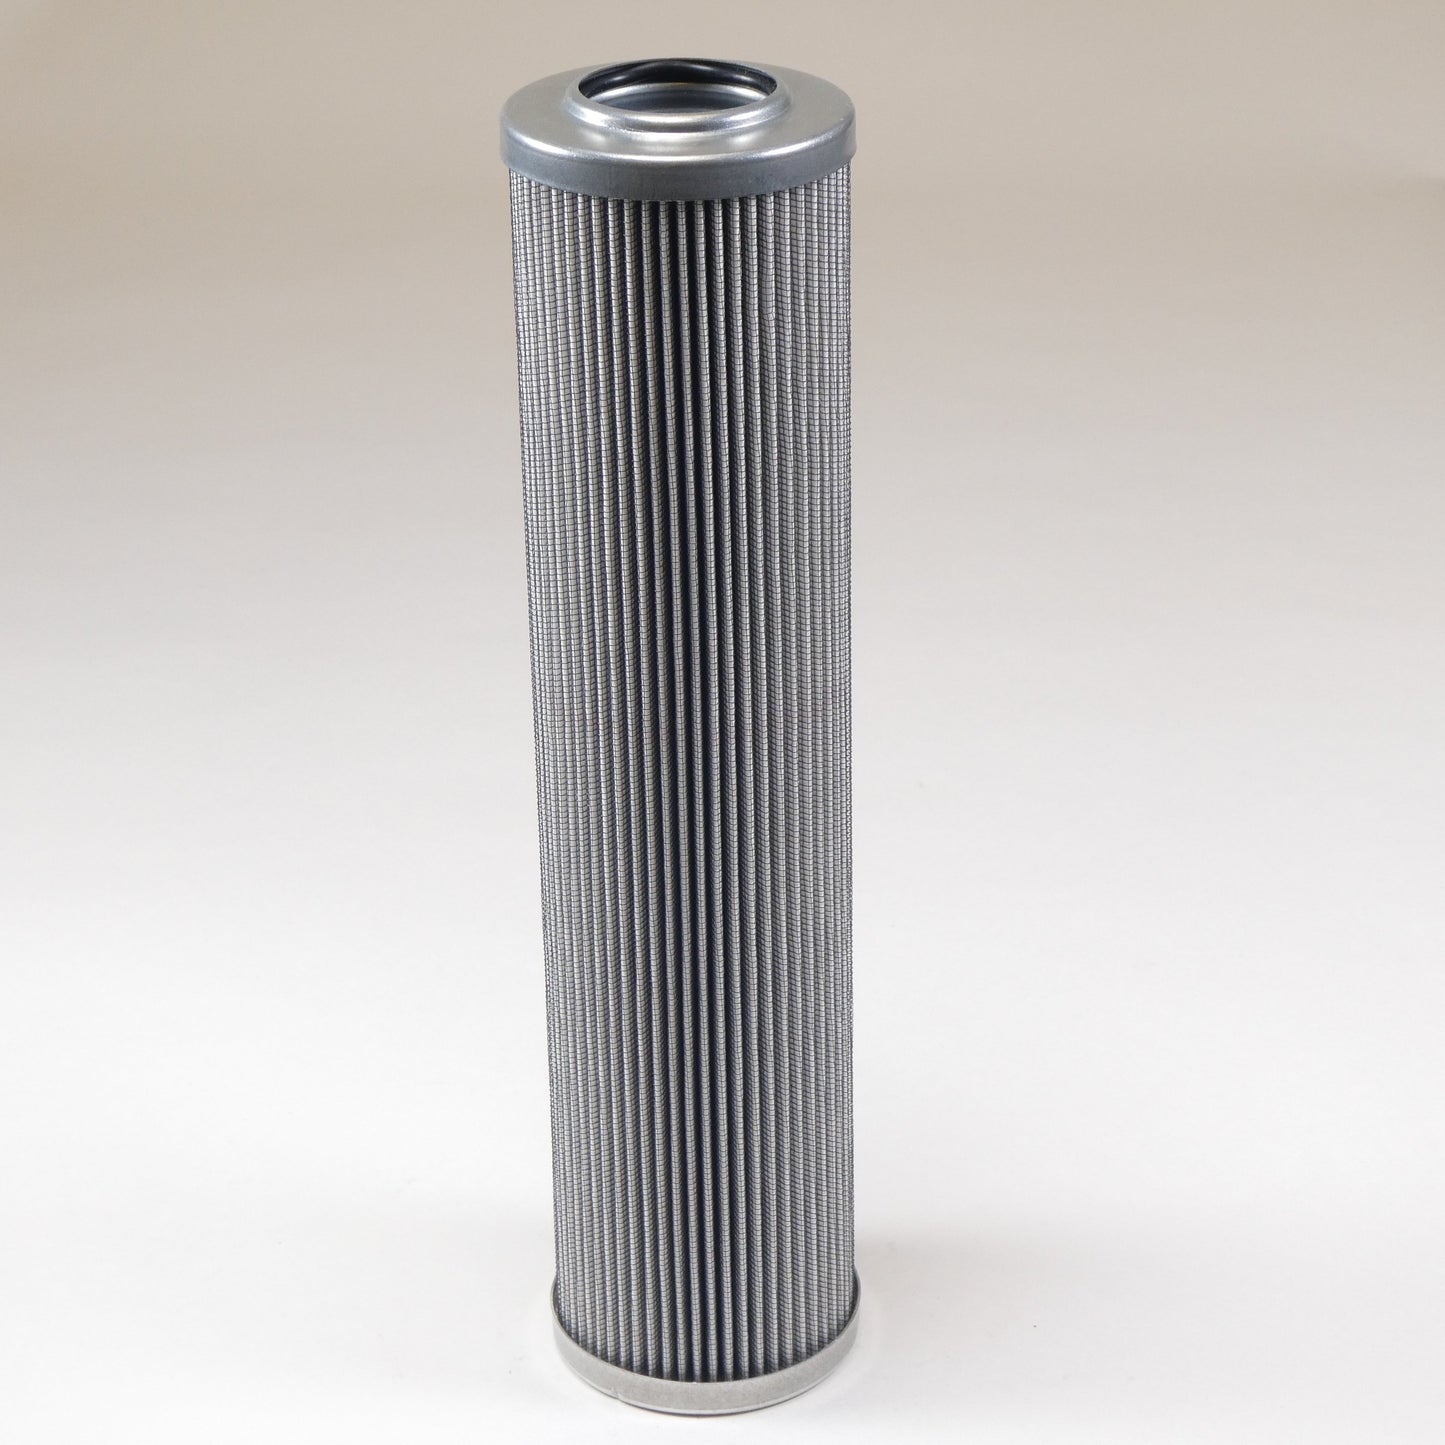 Hydrafil Replacement Filter Element for Hilco 3830-12-091-C